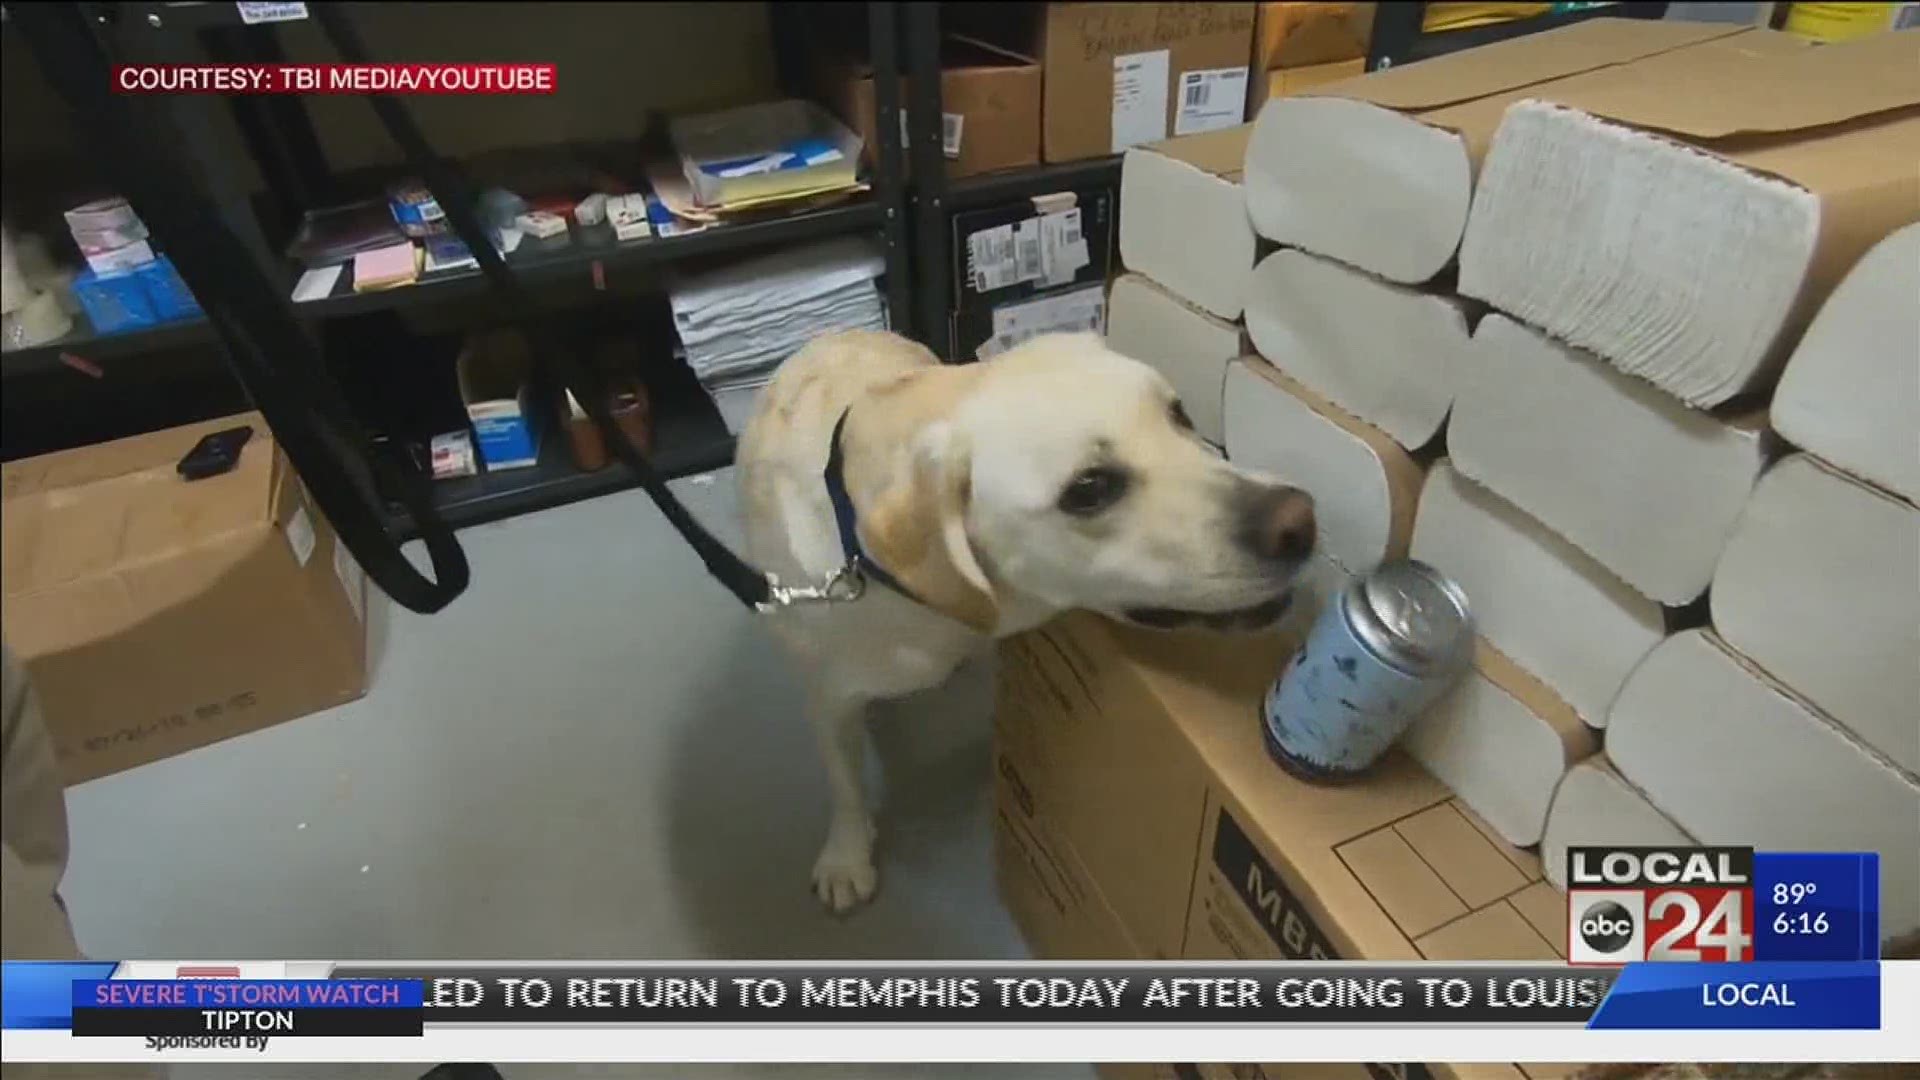 His name is Zeus, a 2-year-old, yellow Labrador Retriever who can sniff out electronic storage devices.